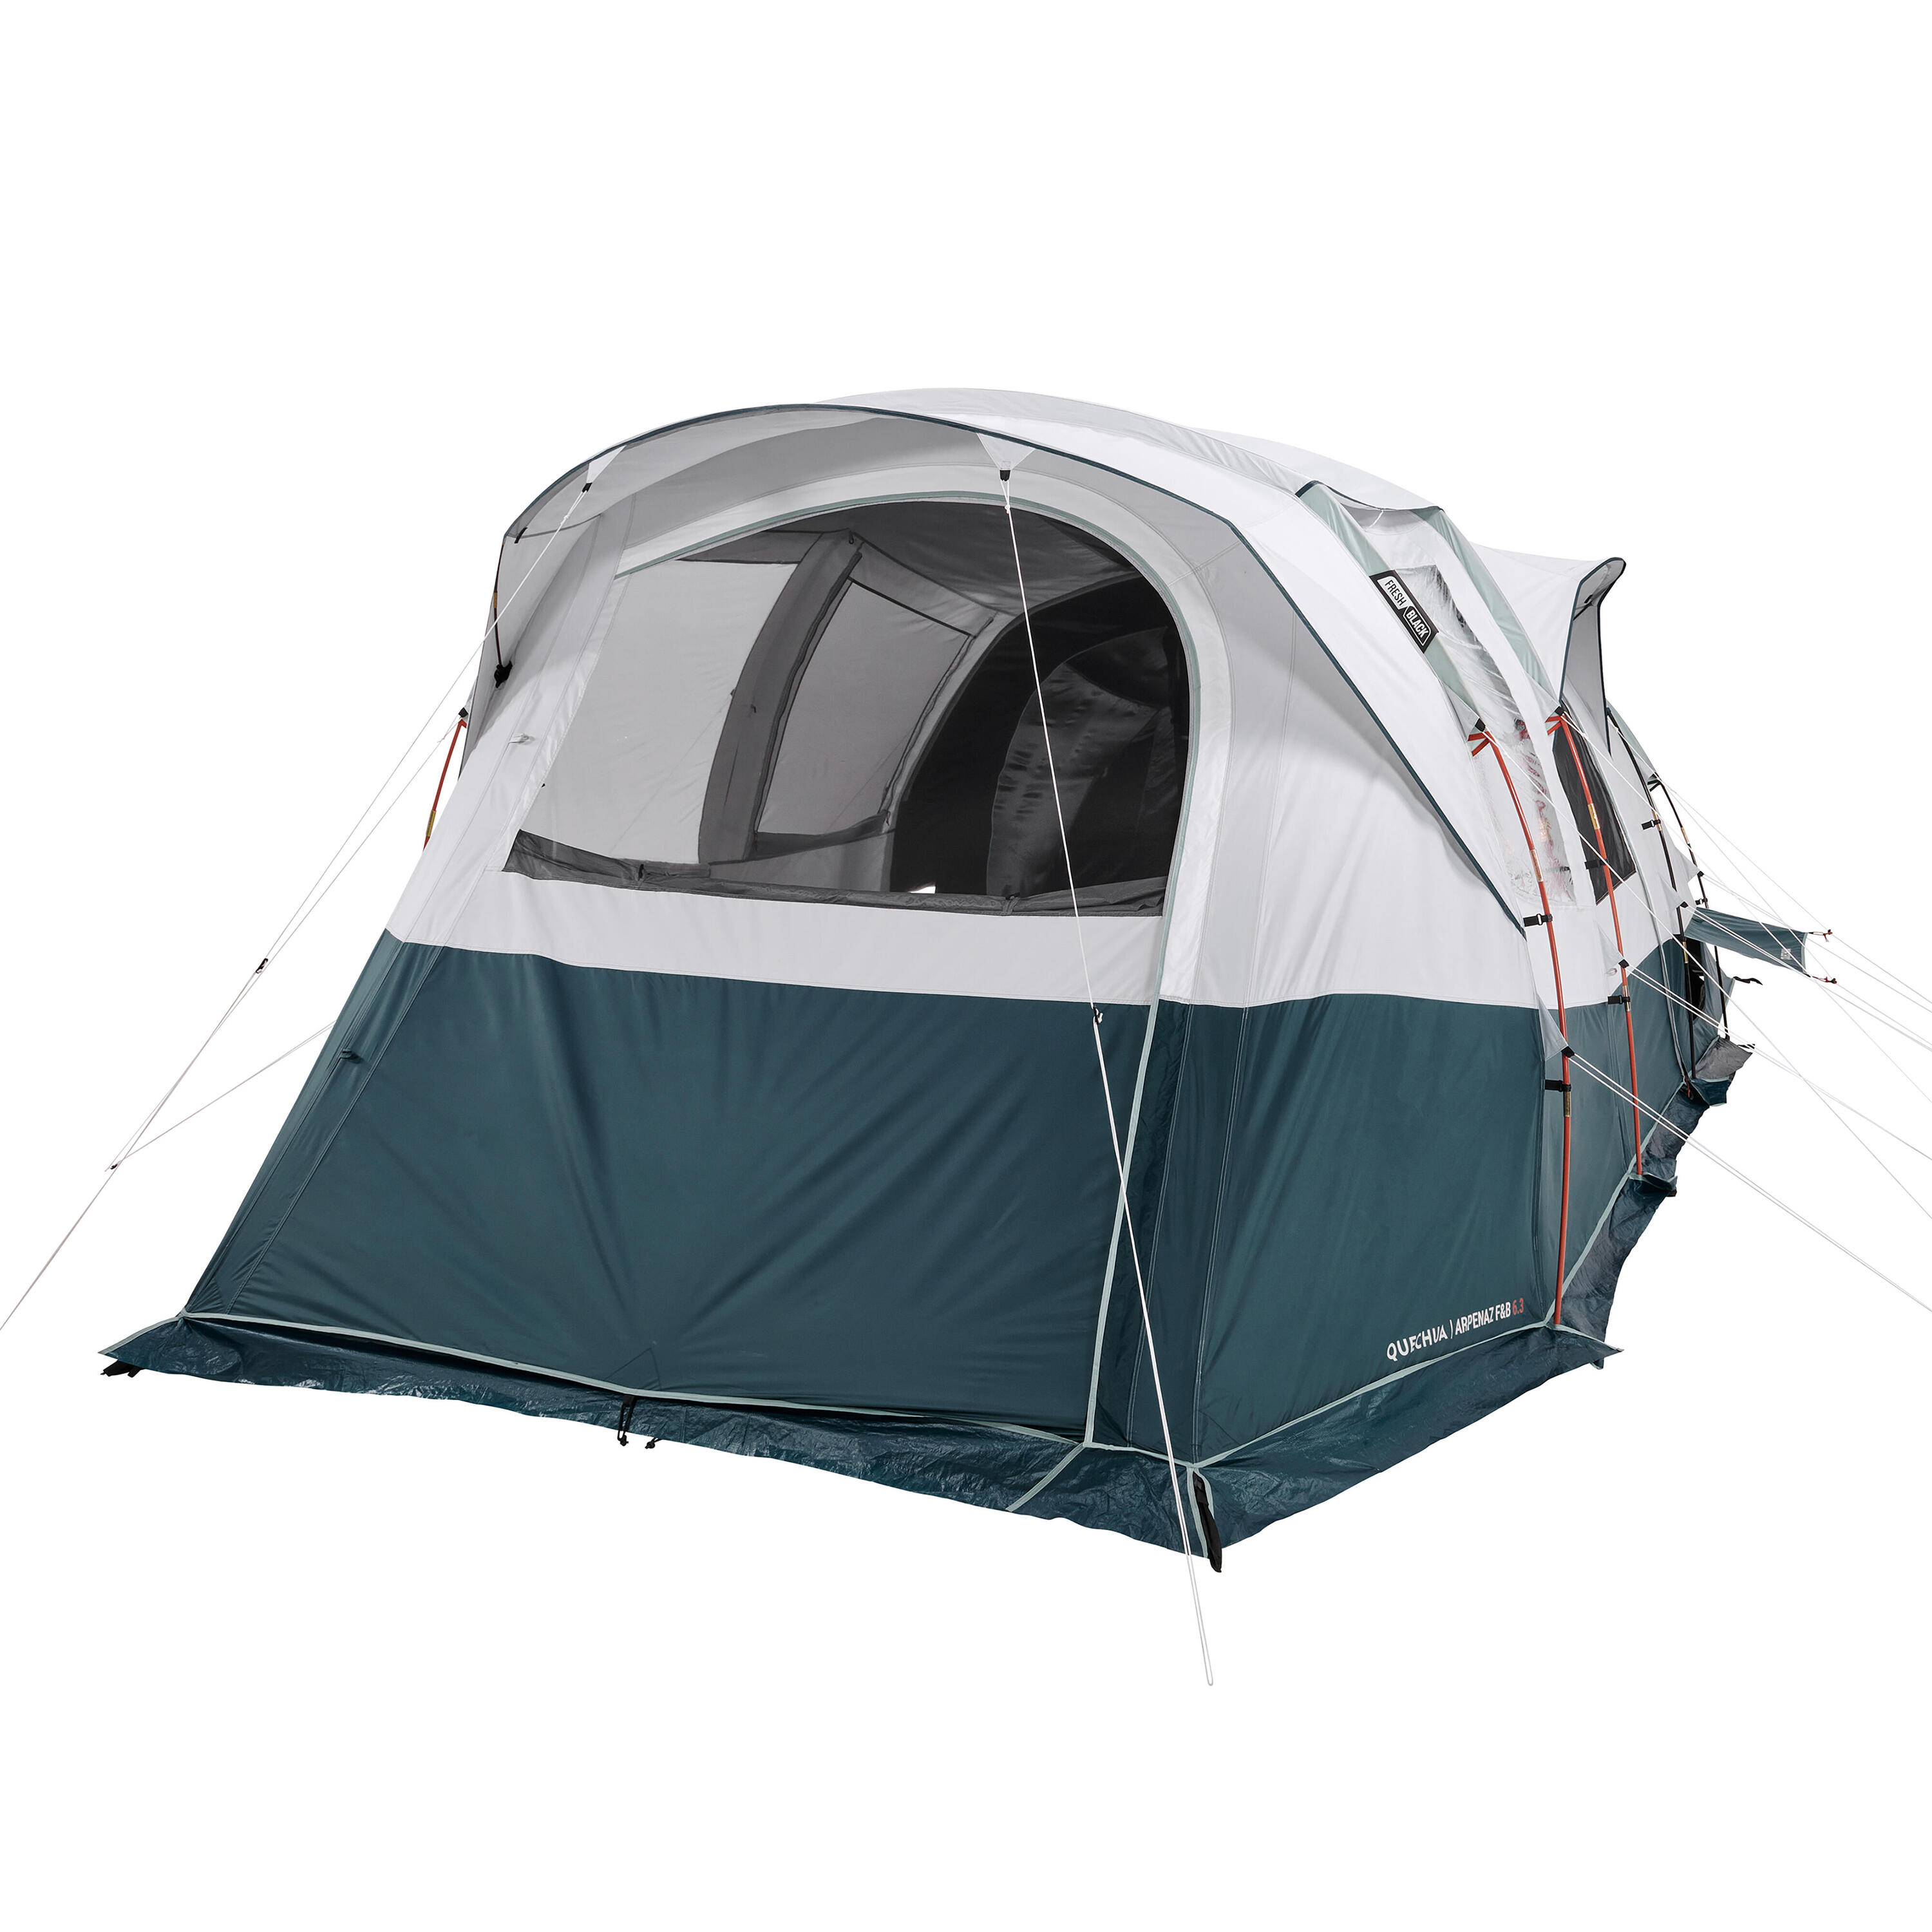 Camping tent with poles - Arpenaz 6.3 F&B - 6 Person - 3 Bedrooms 8/35